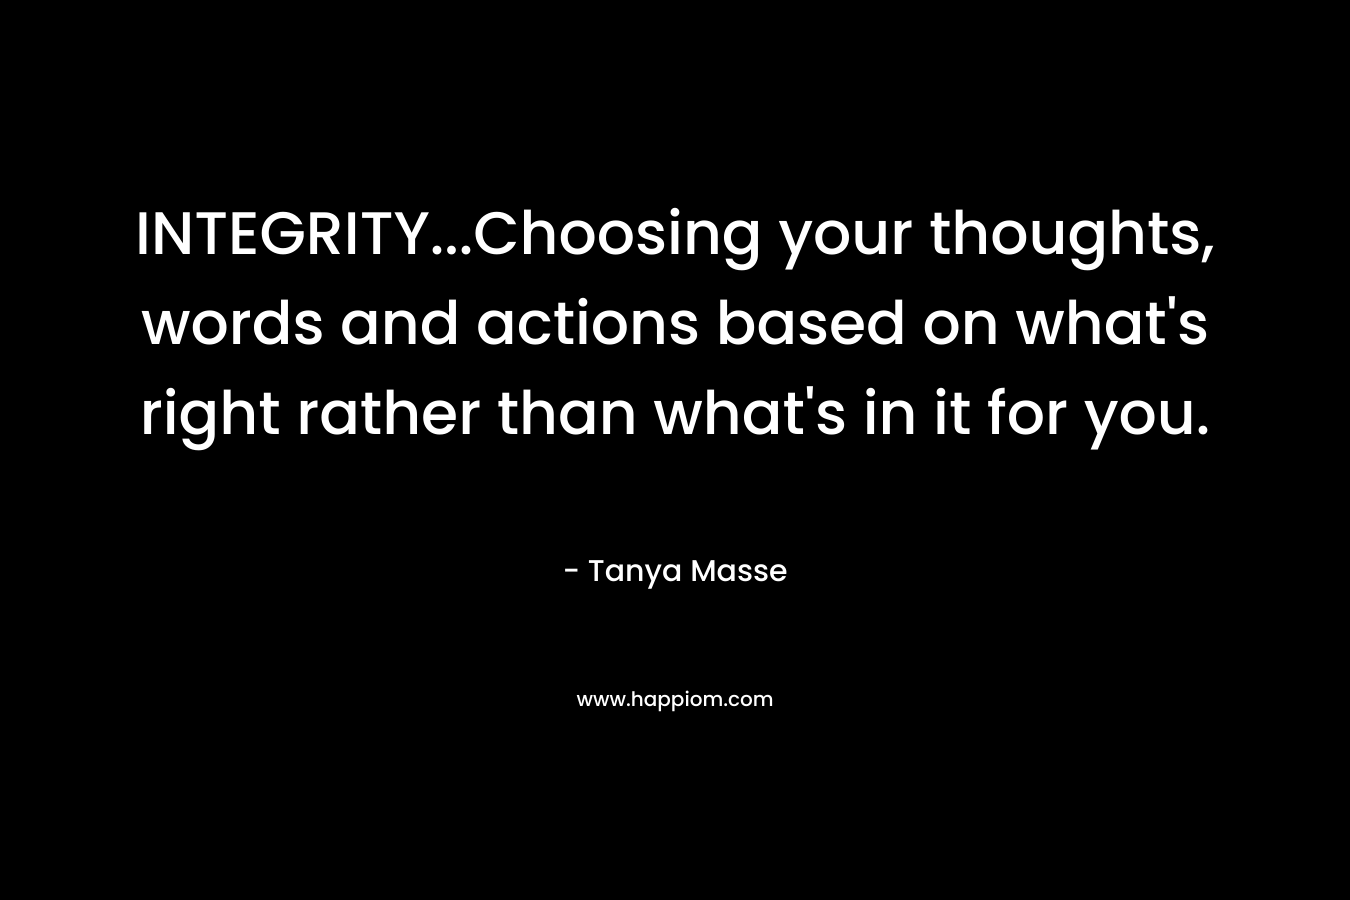 INTEGRITY...Choosing your thoughts, words and actions based on what's right rather than what's in it for you.